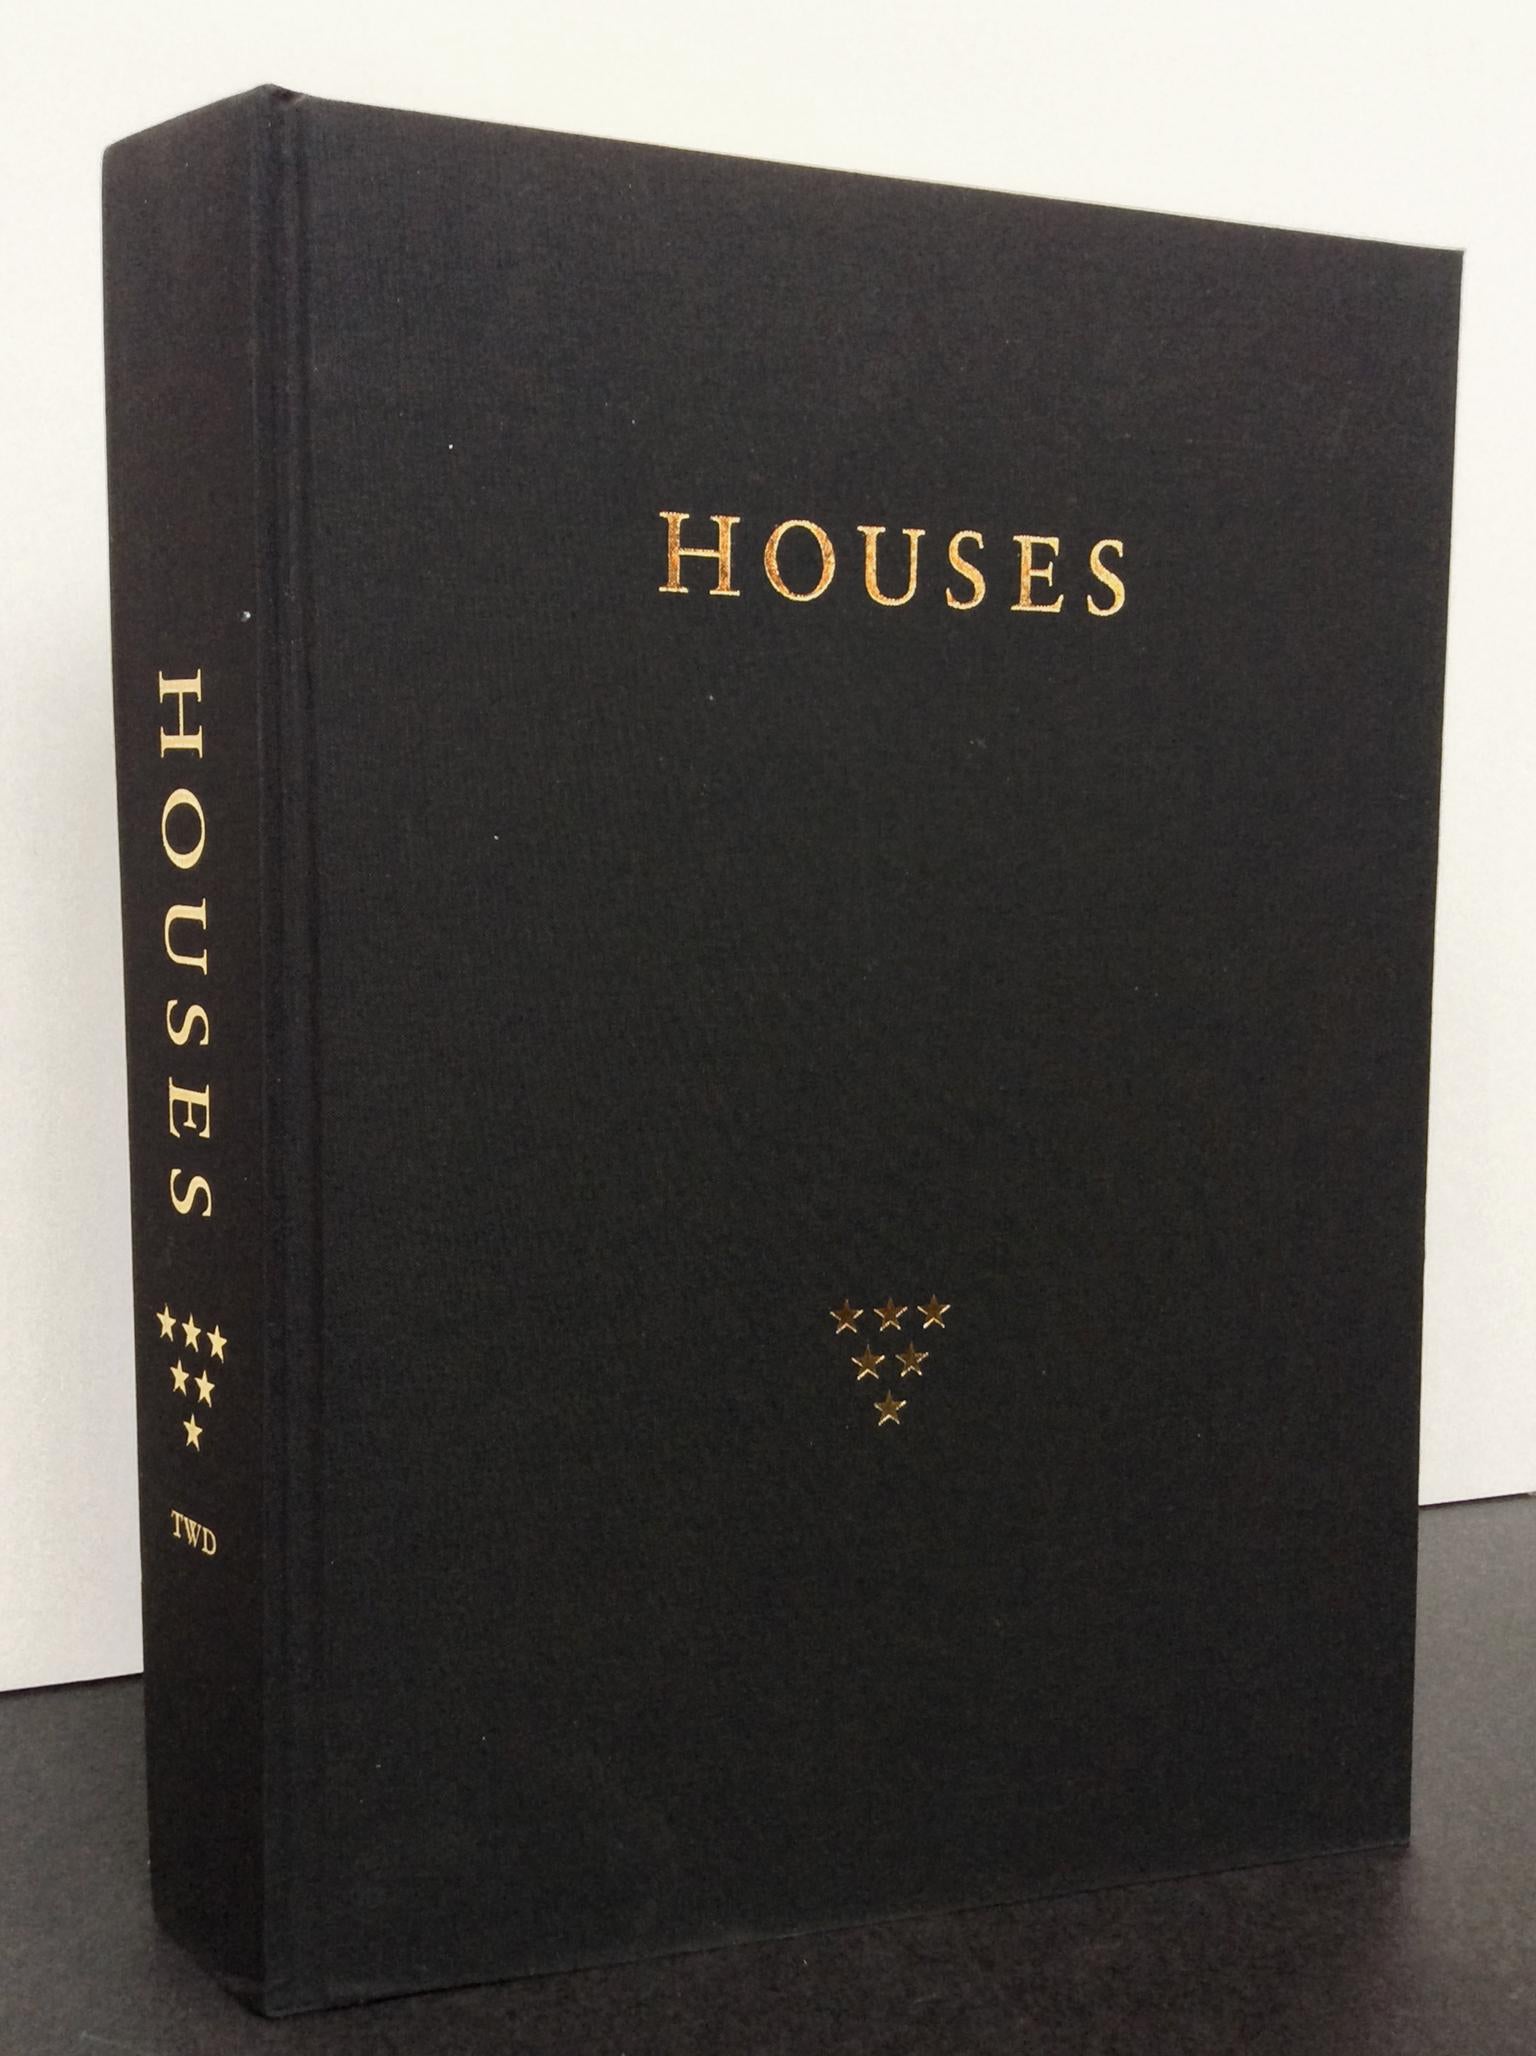 Houses Signed Monograph by the Office of Thierry W. Despont Ltd 8